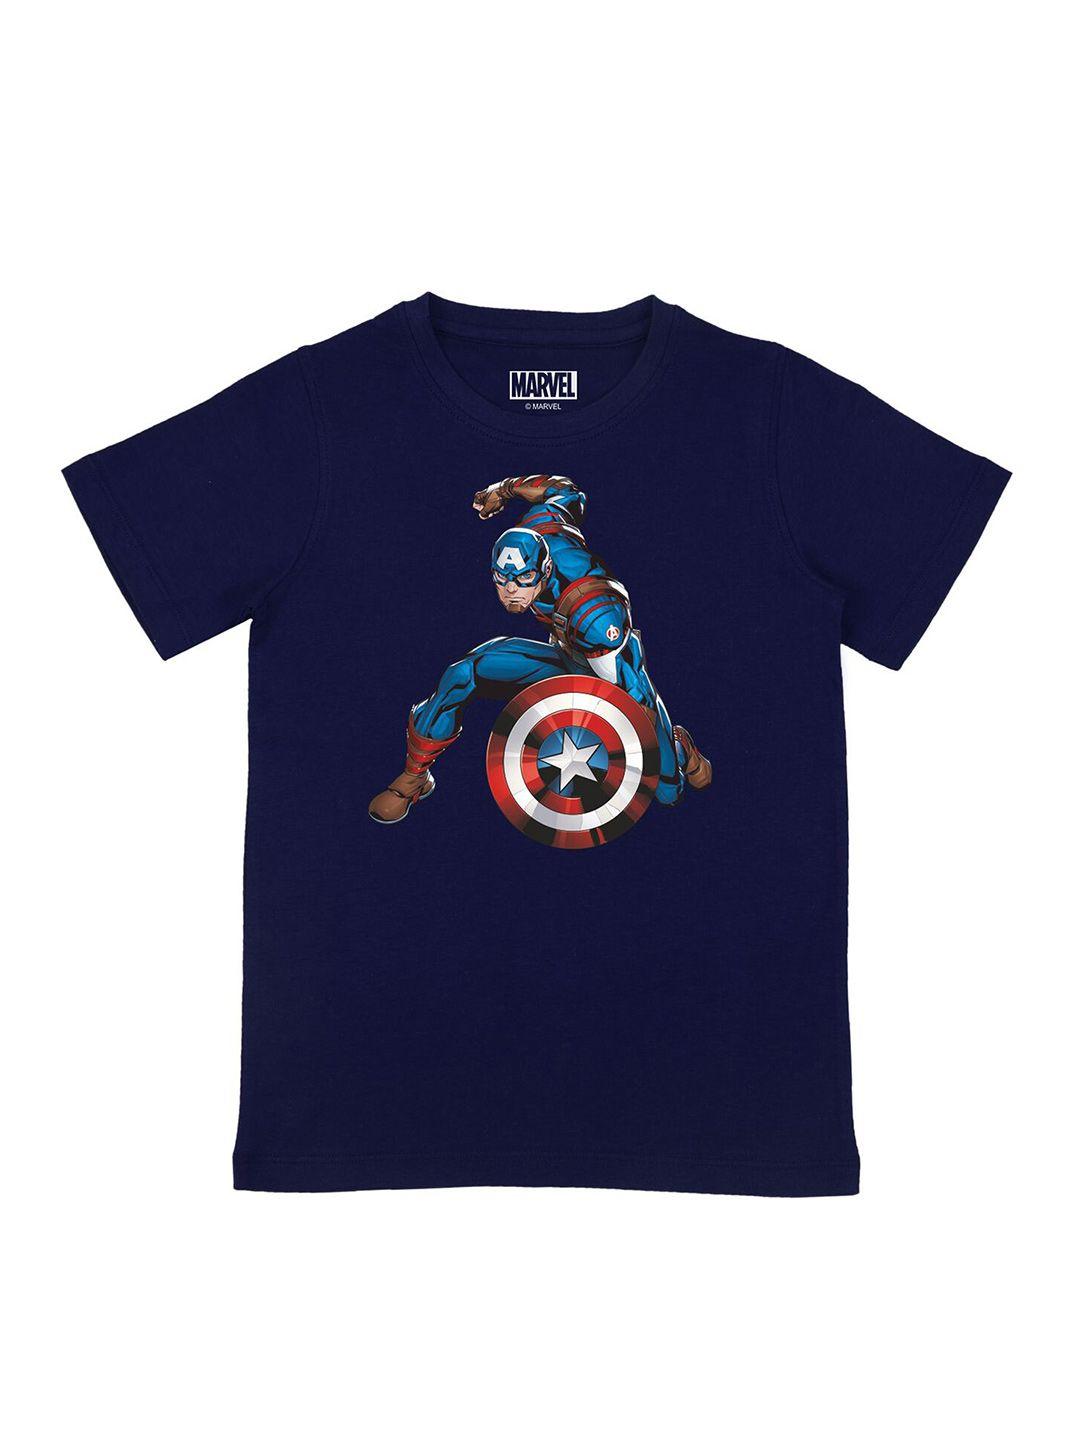 marvel by wear your mind boys navy blue printed t-shirt